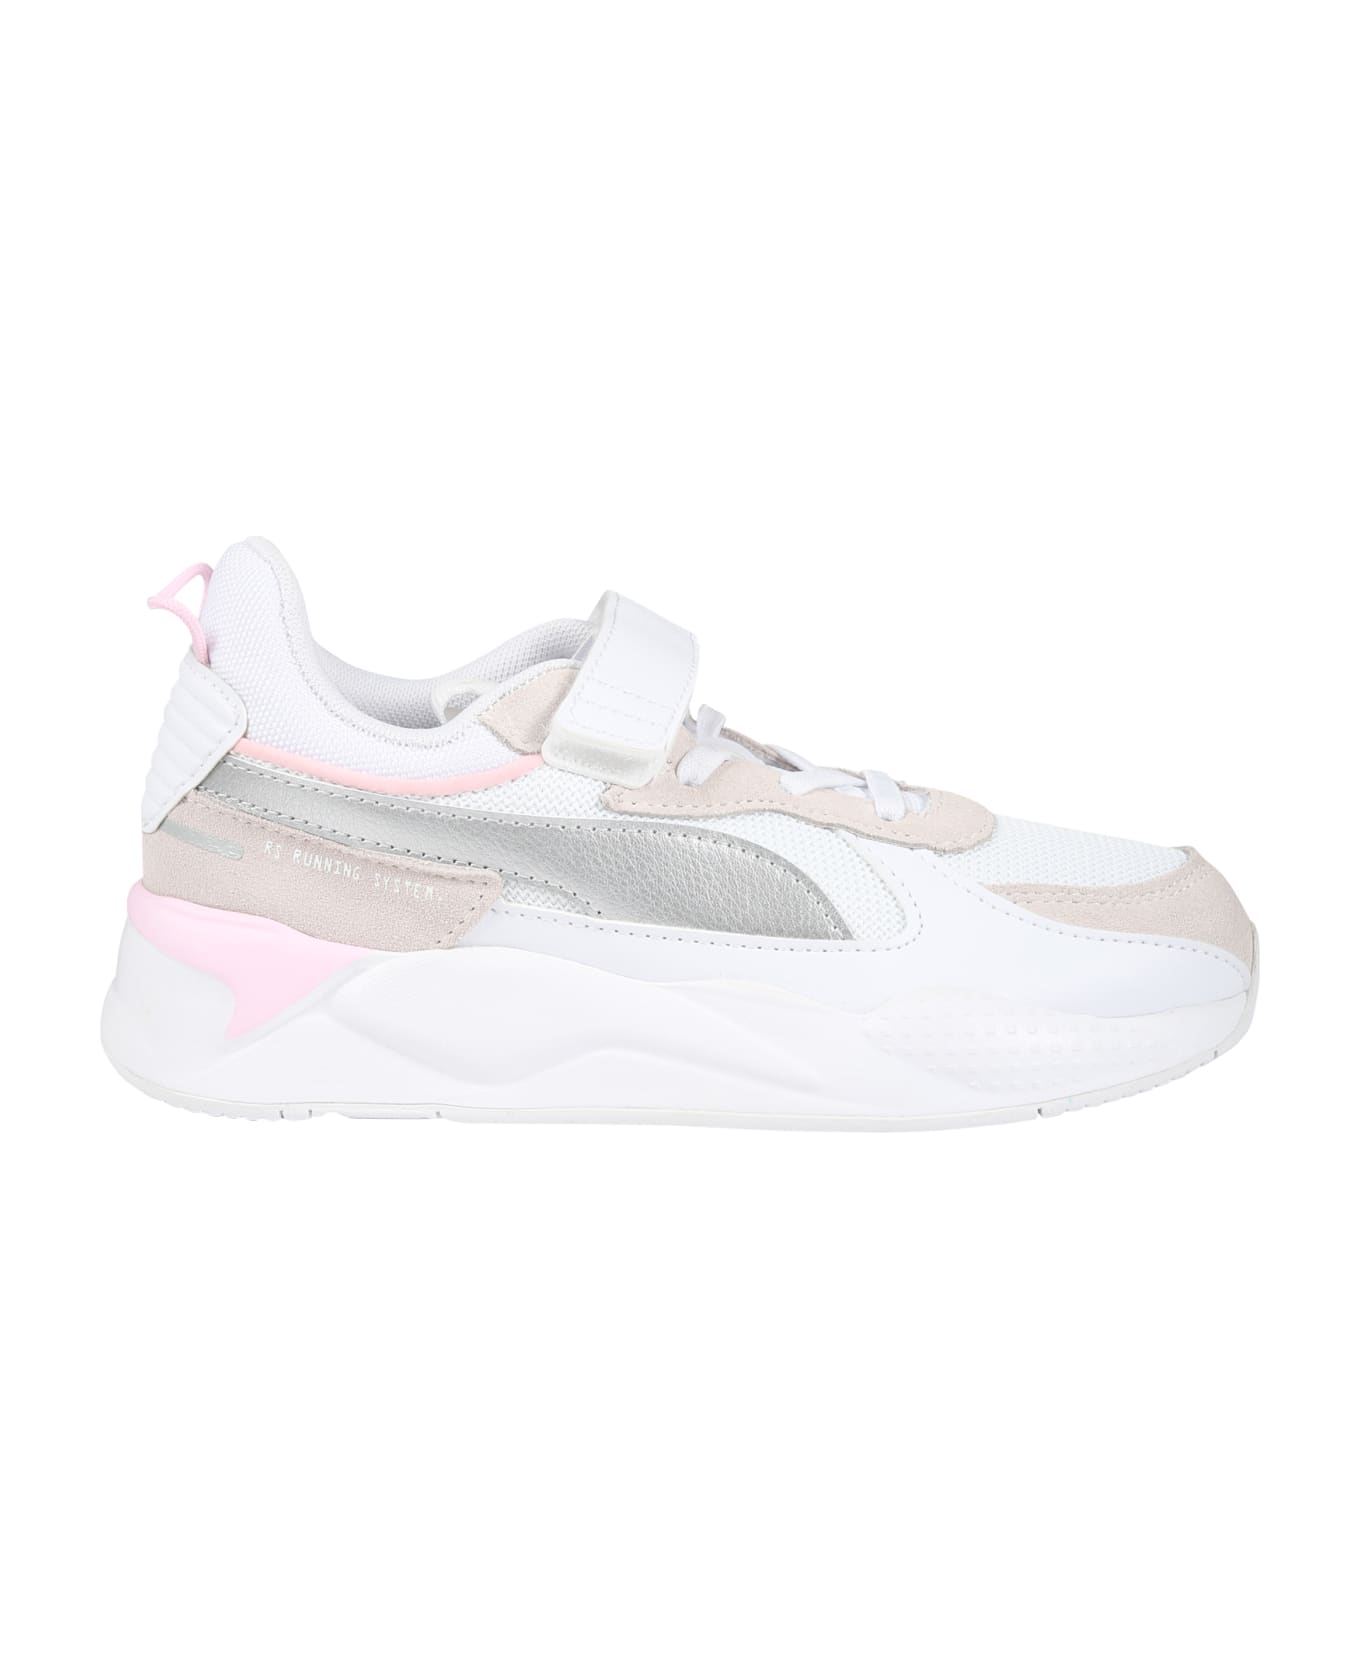 Puma White Sneakers For Girl With Logo - Multicolor シューズ